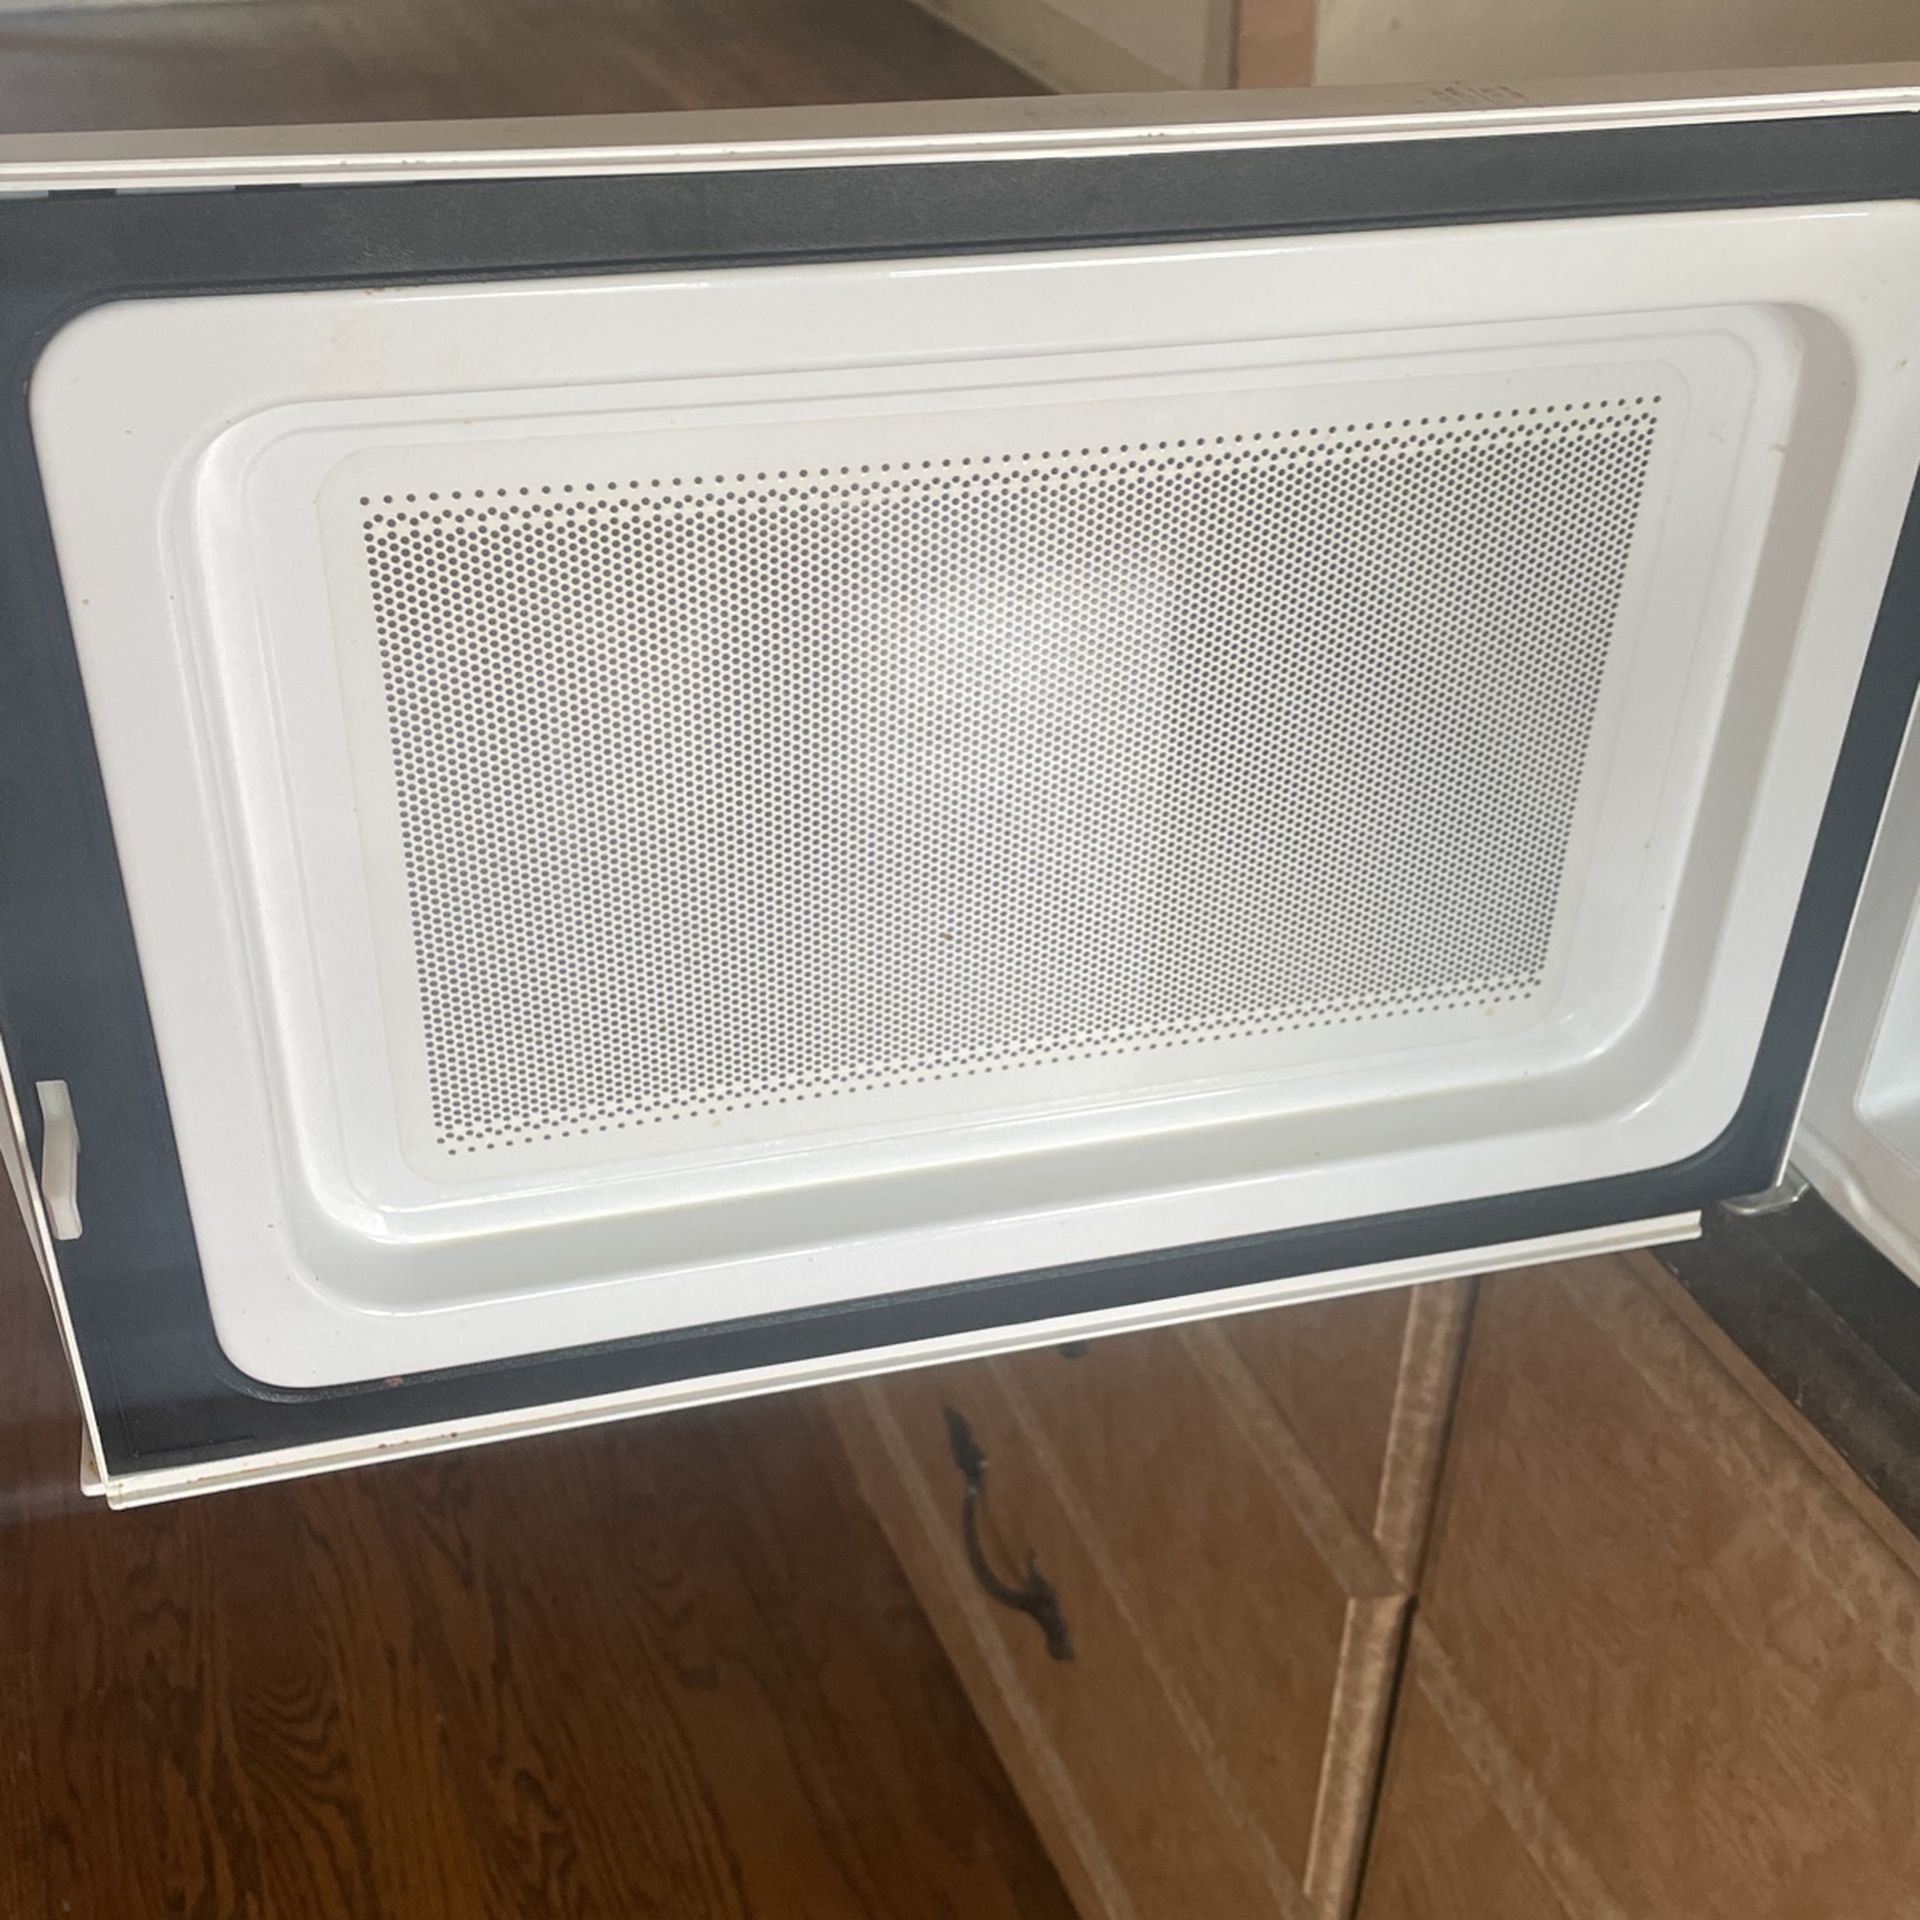 CHEAP Criterion microwave $27 for Sale in Chicago, IL - OfferUp